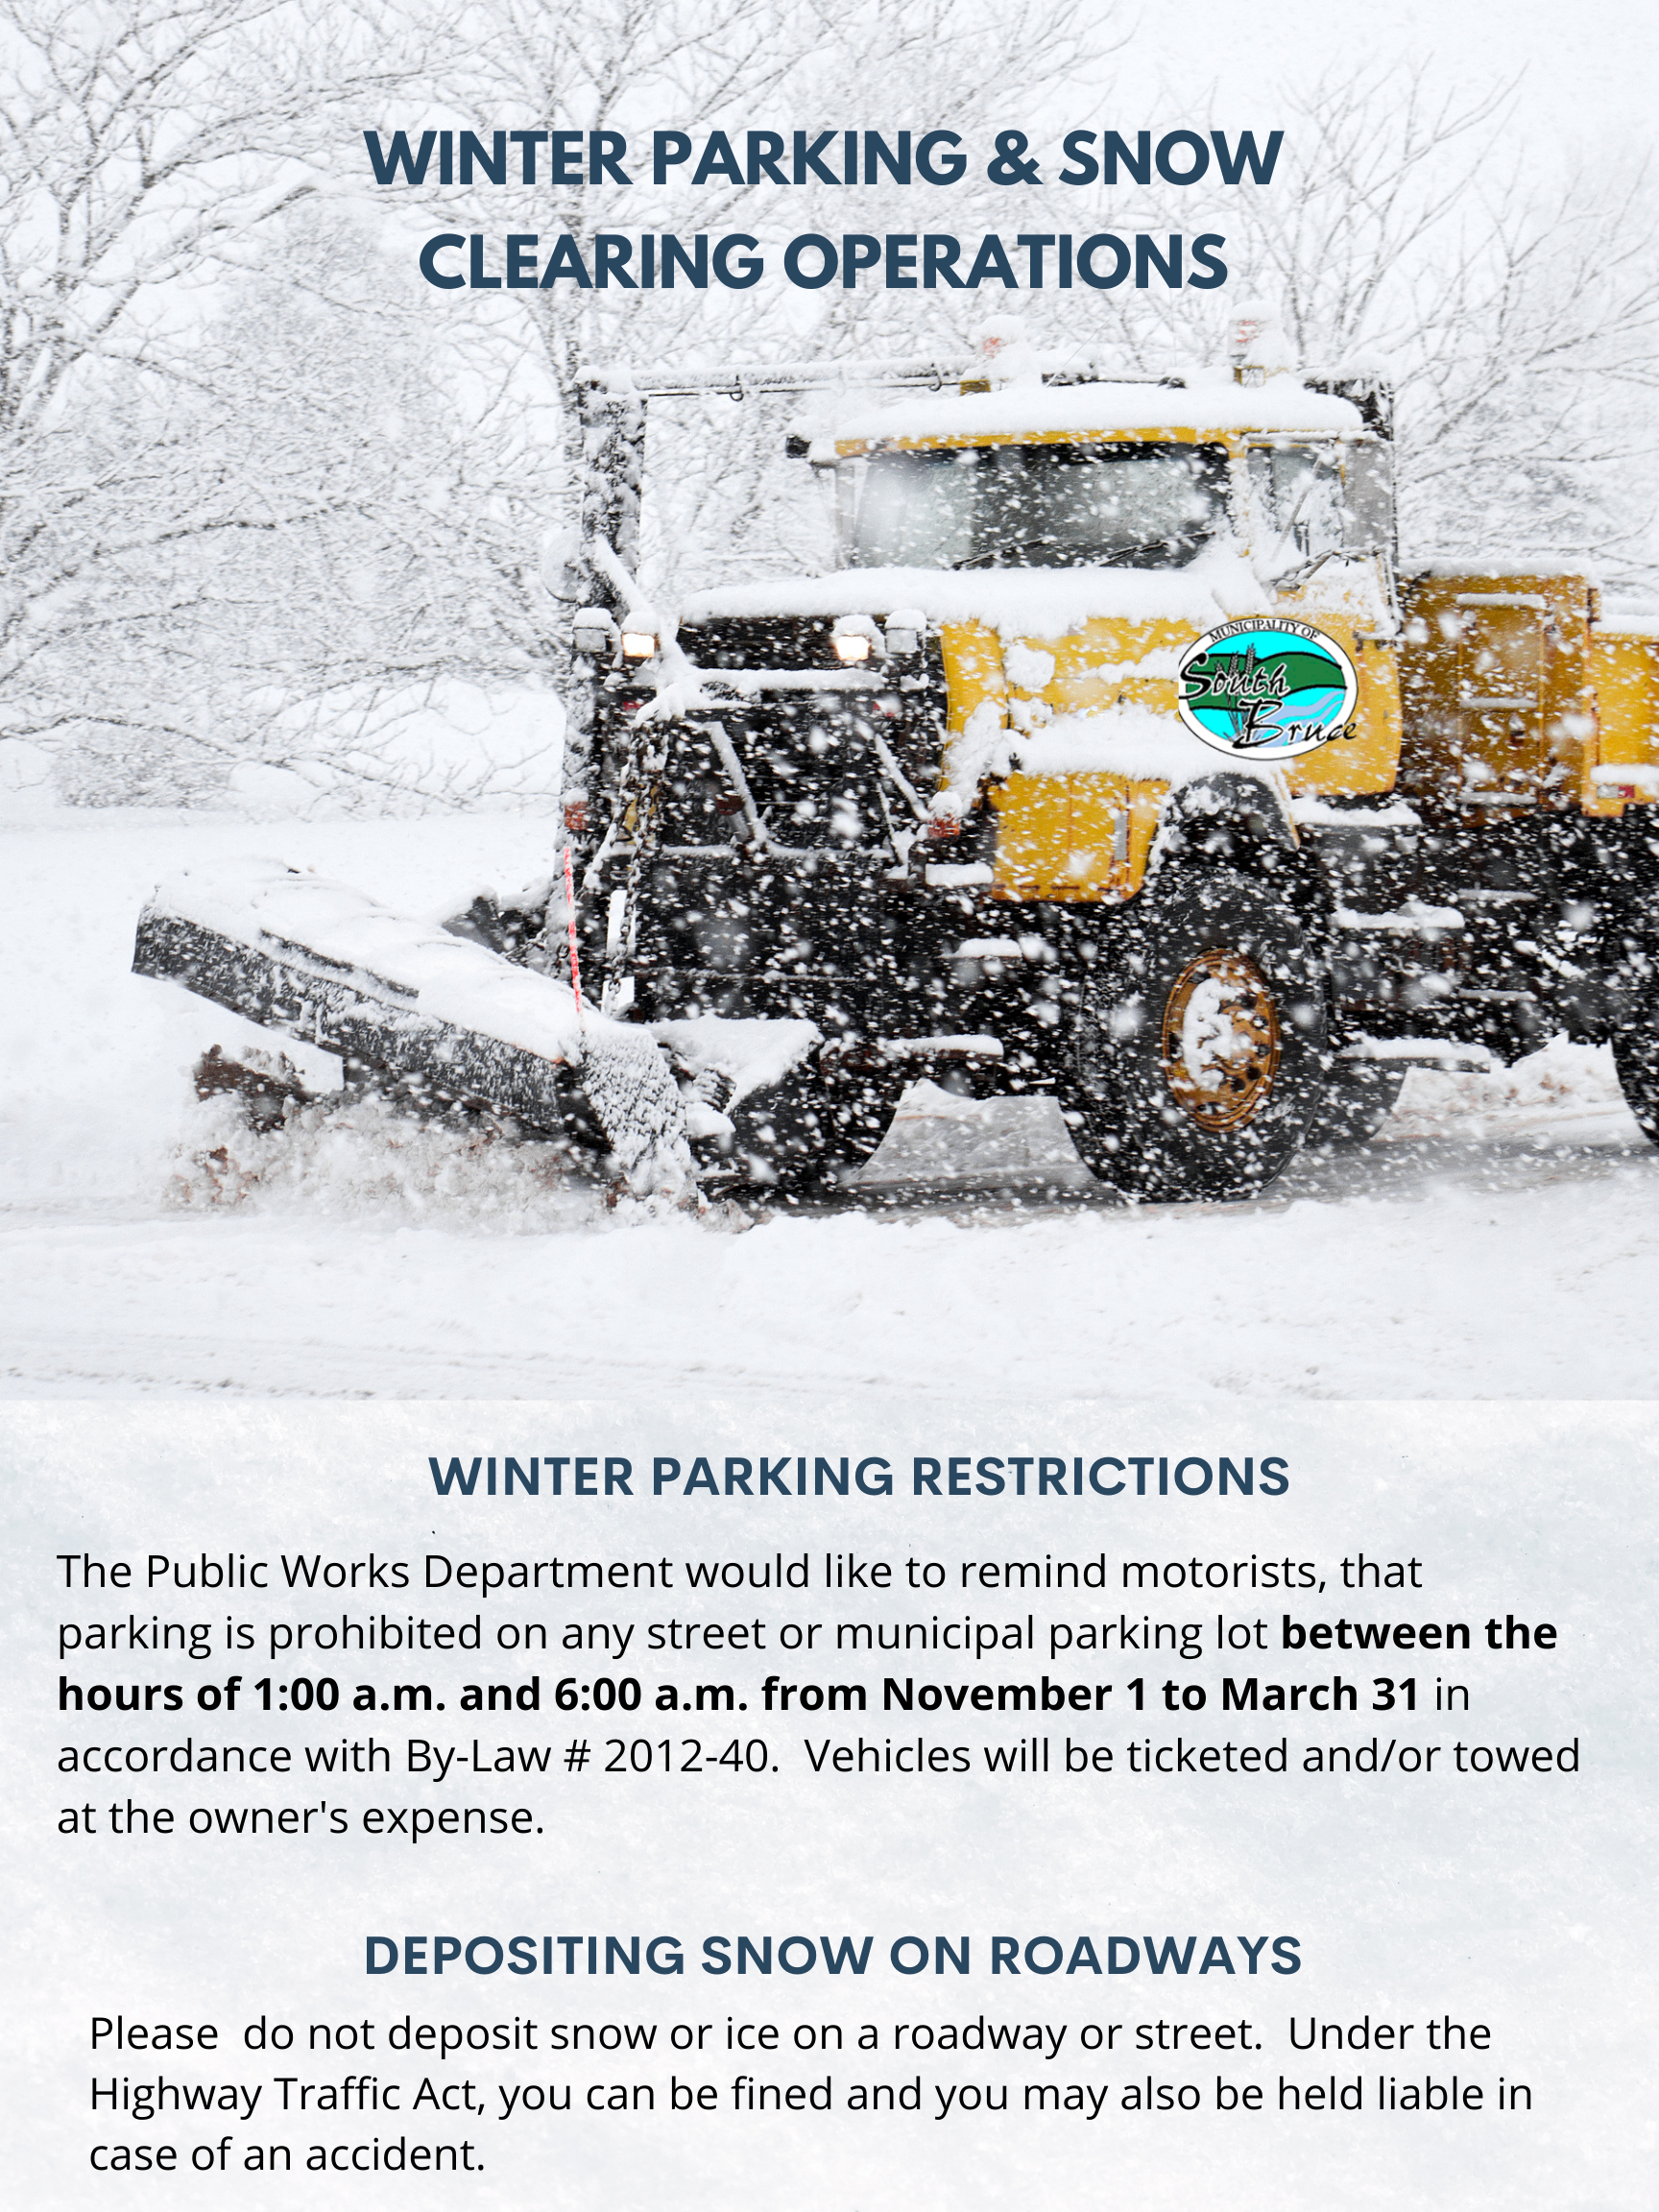 Winter Parking and Snow Clearing Operations Poster